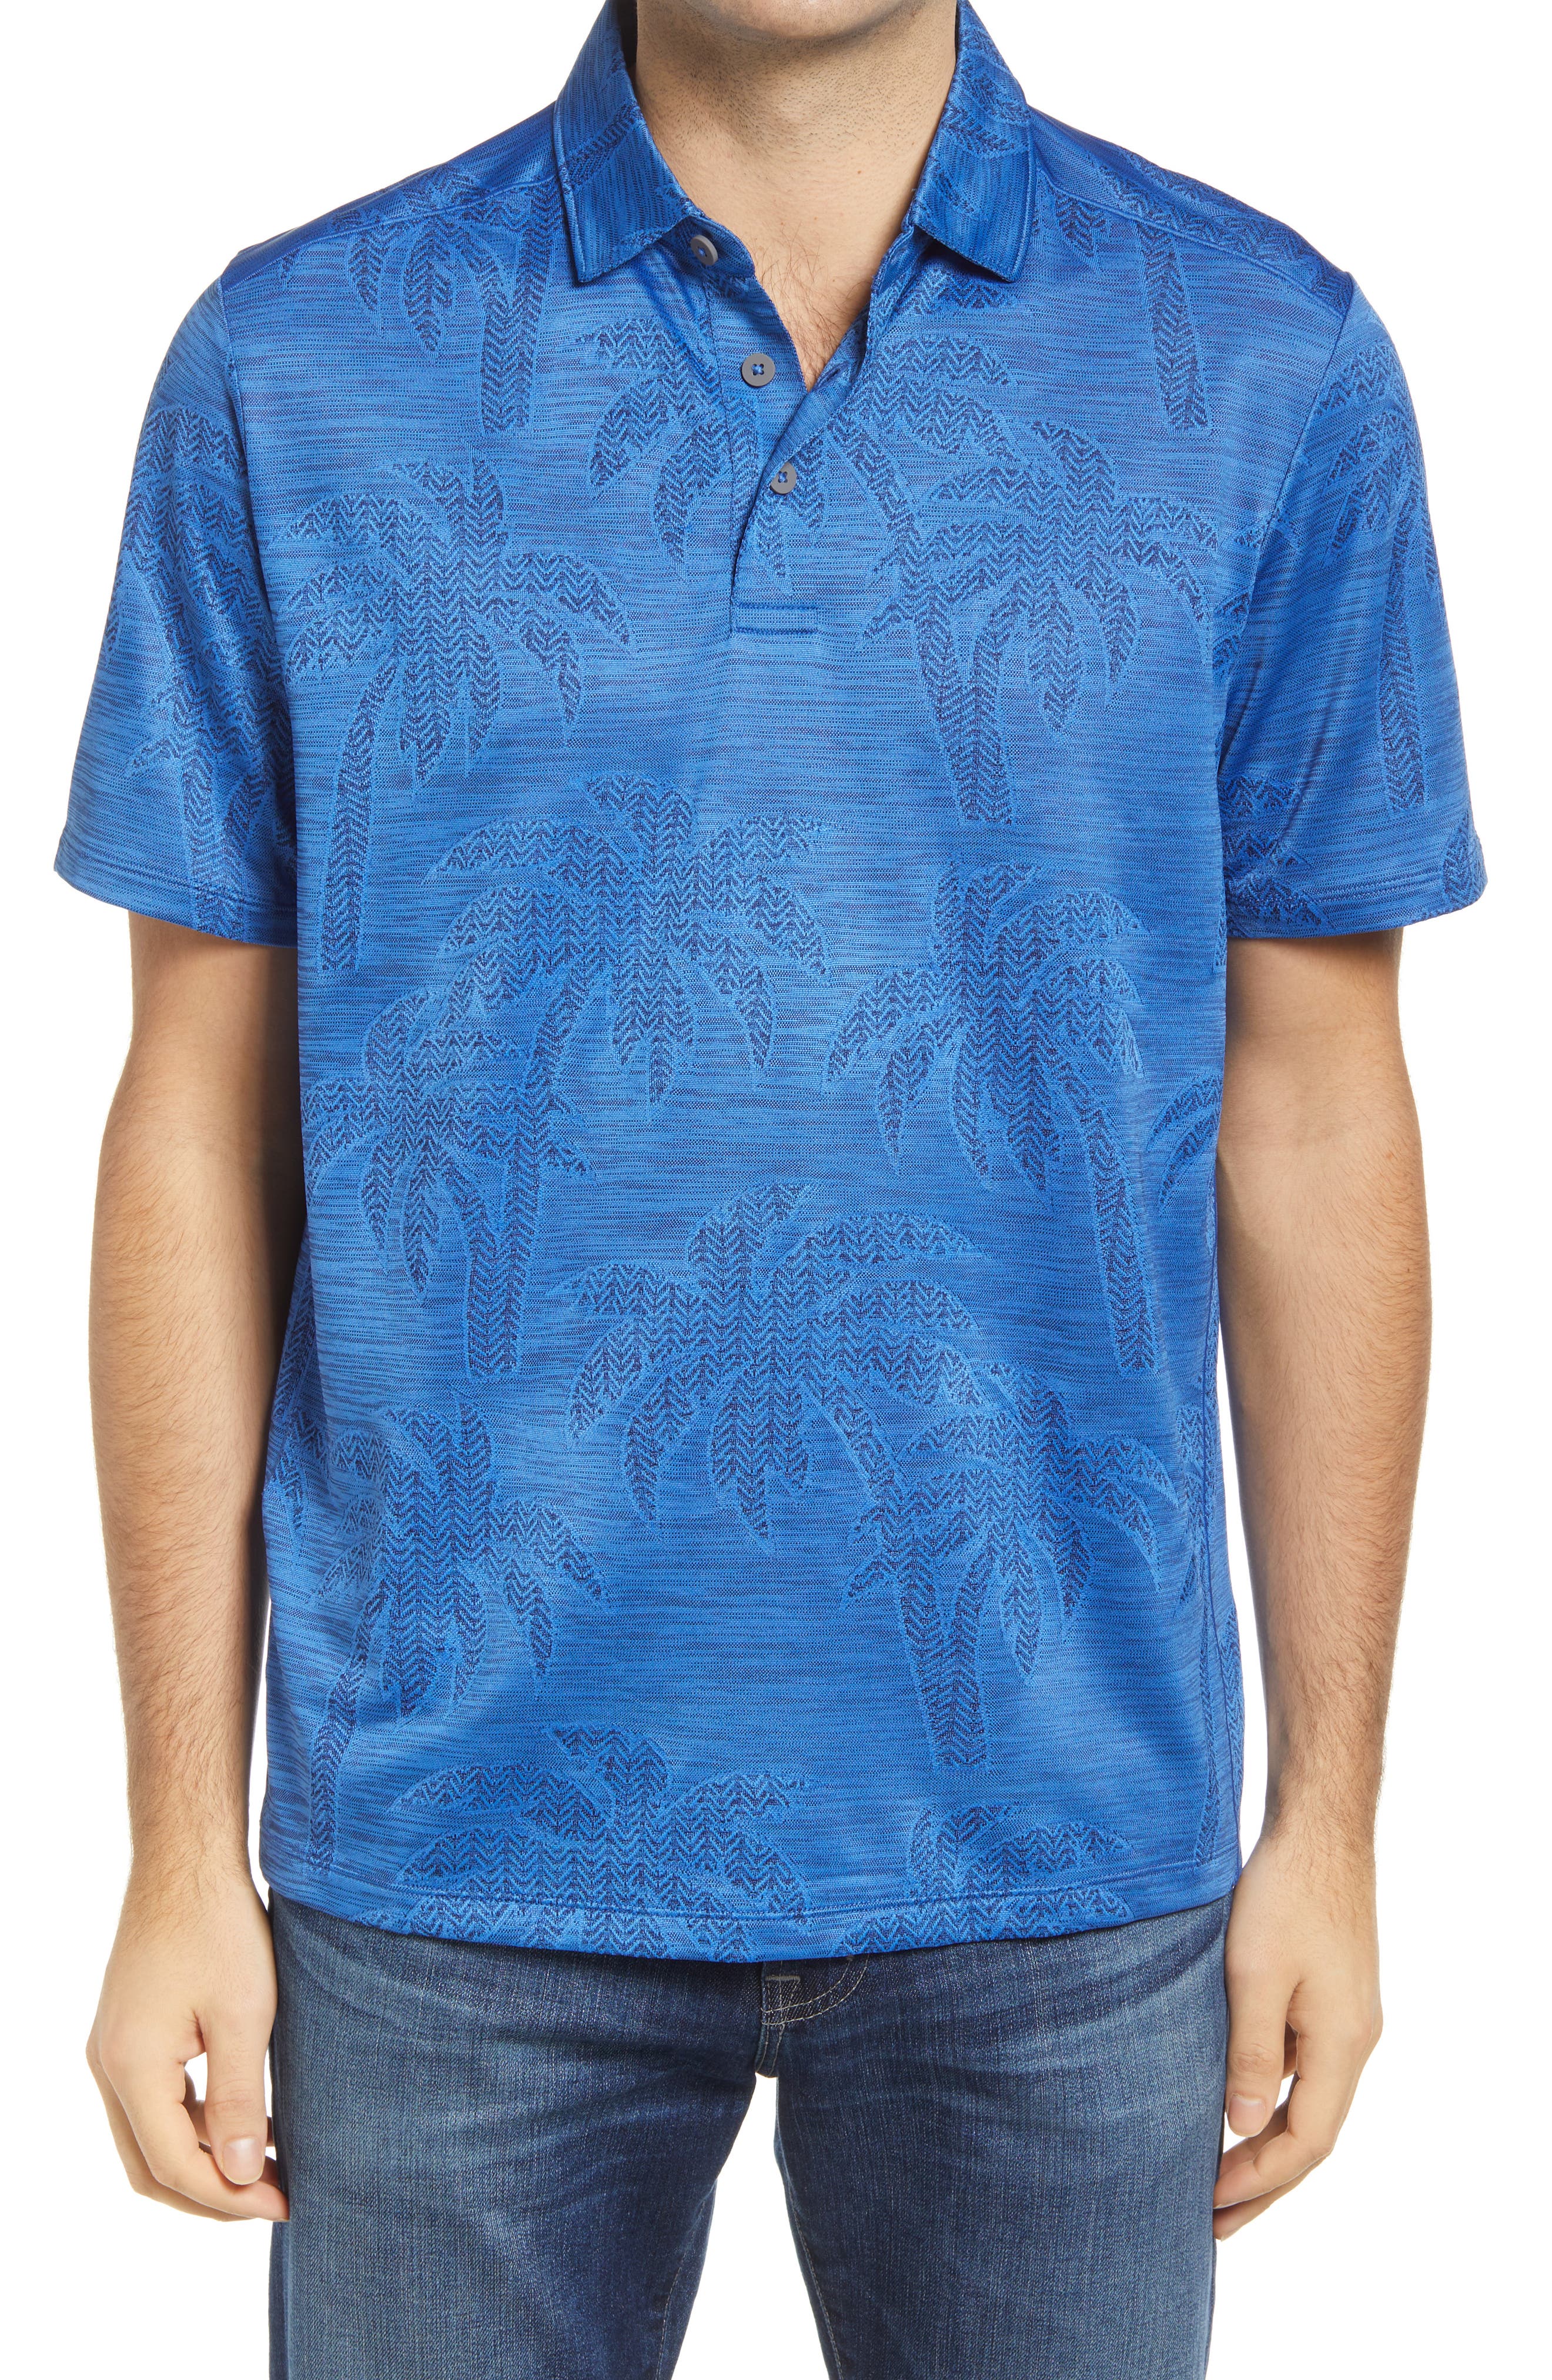 Tommy Bahama The Emfielder Polo $88 Blue Note # T20856